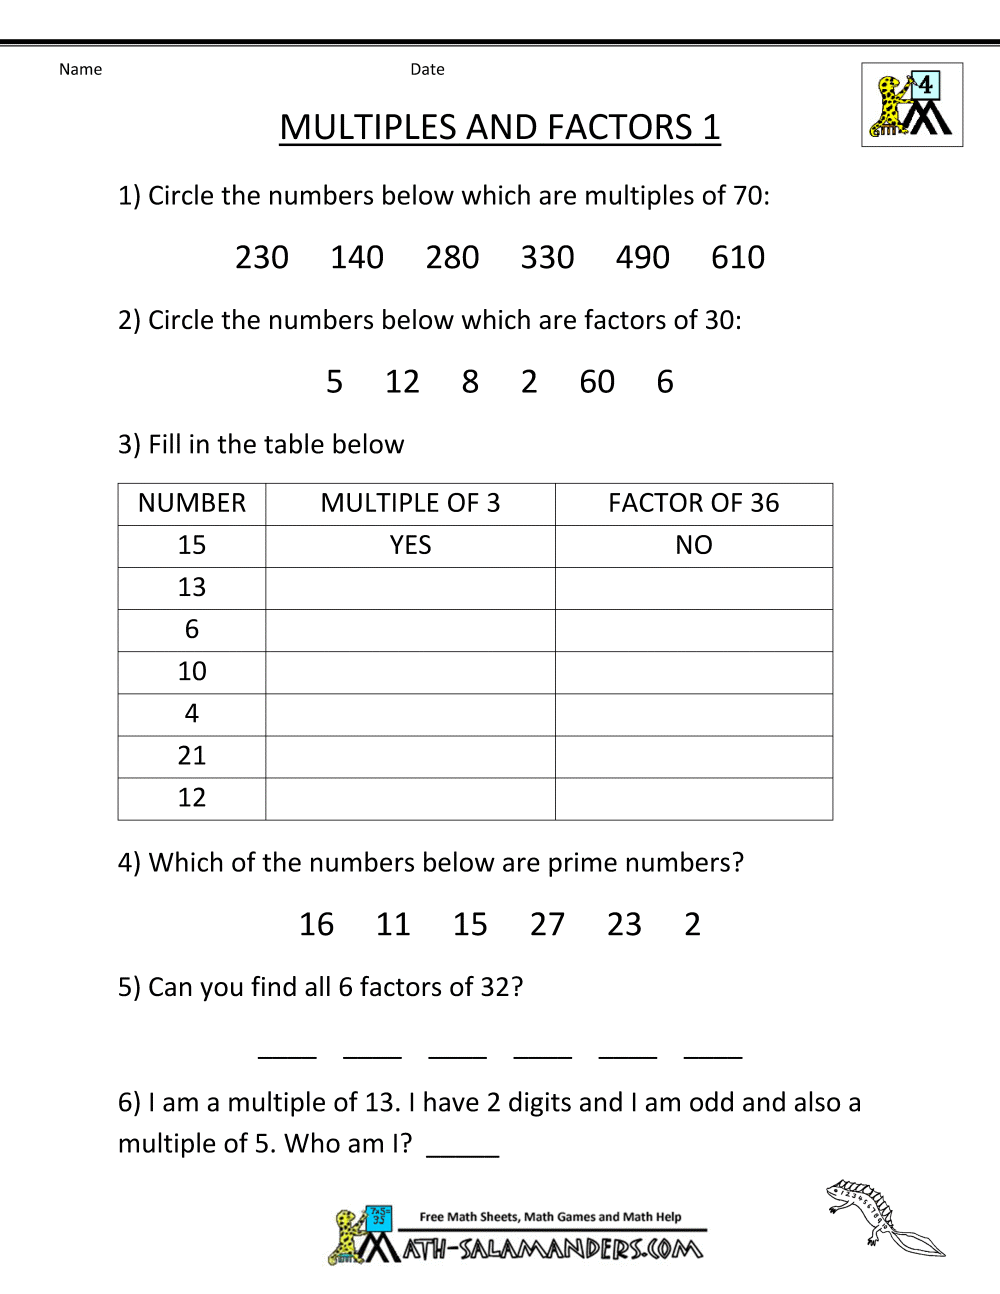 factors-and-multiples-worksheet-learn-mathematics-online